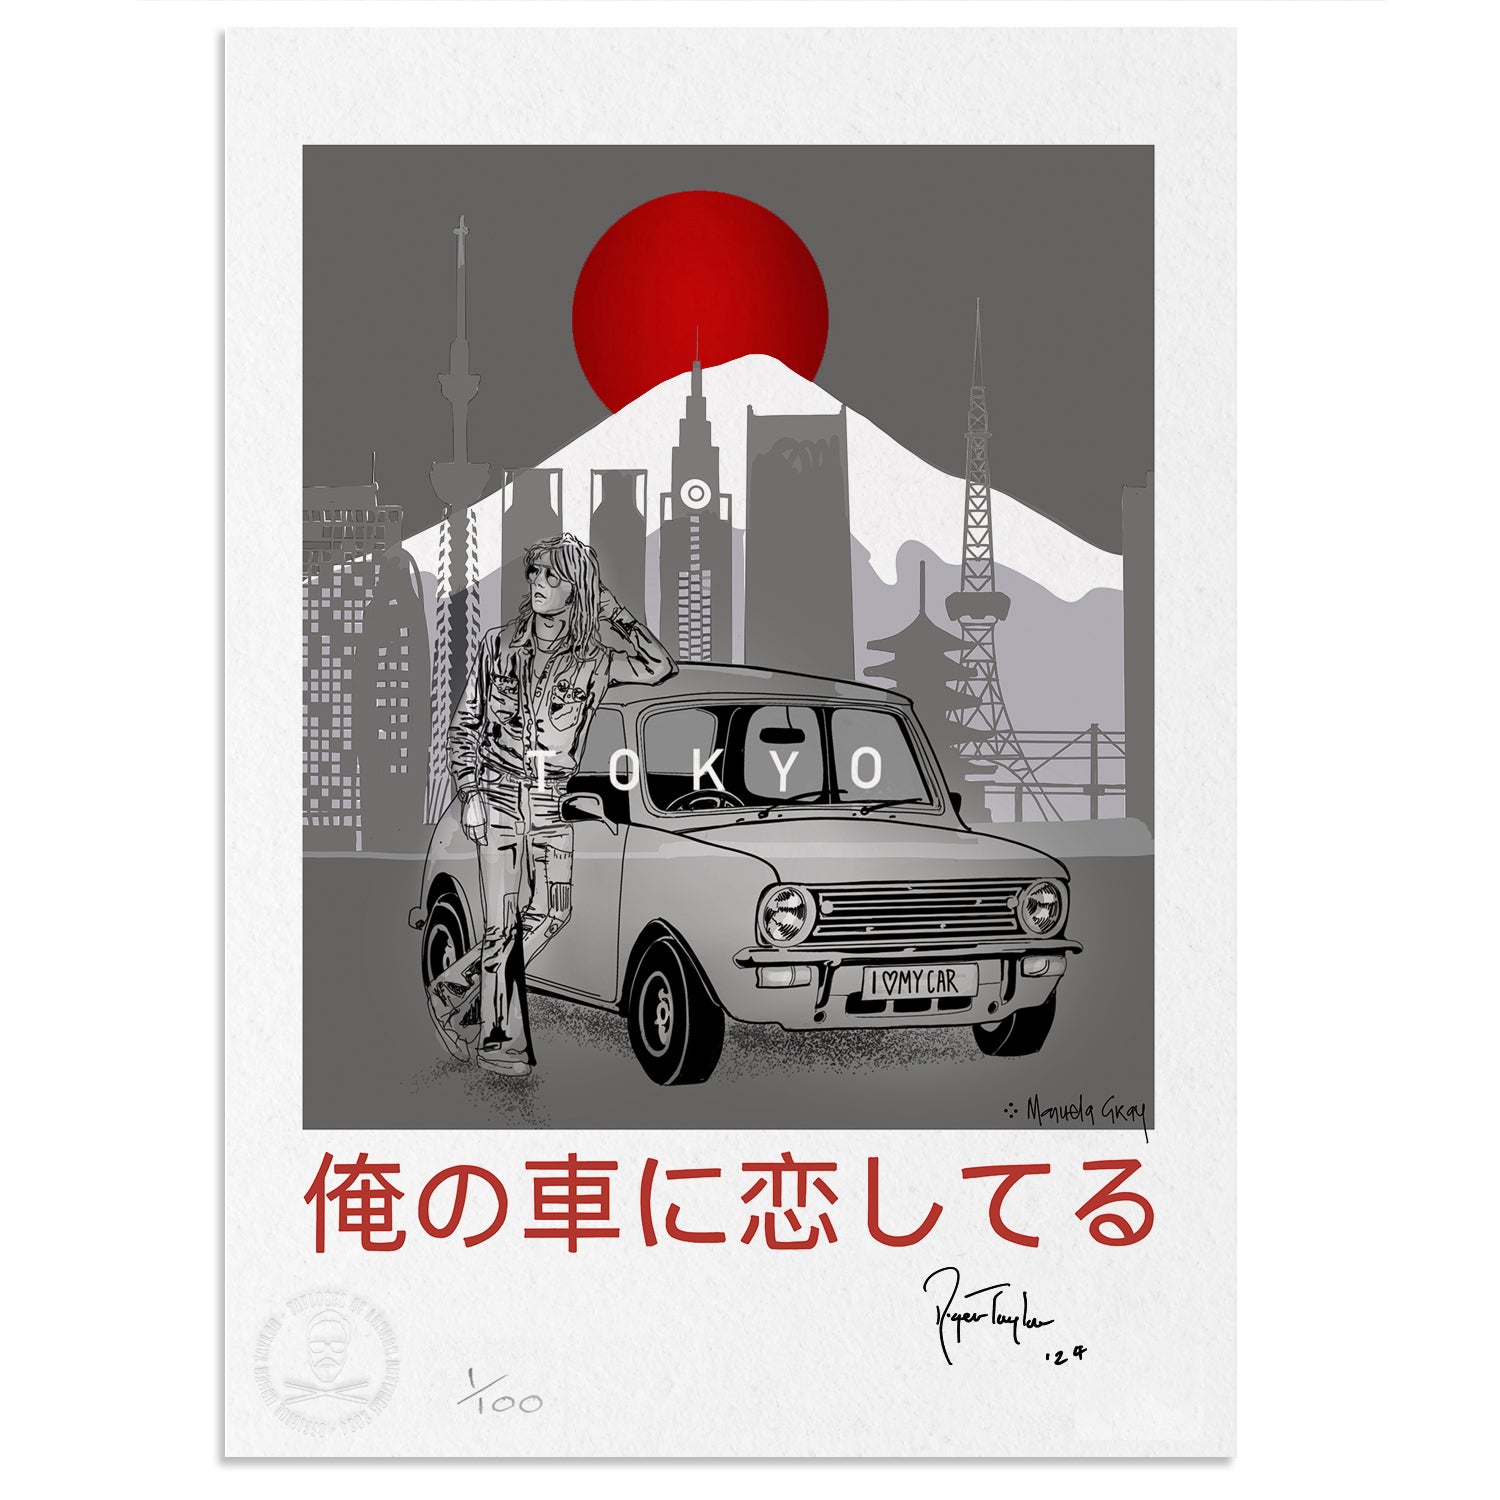 Roger Taylor - Limited Edition Japanese Signed A1 Collectors Lithograph 'TOKYO'